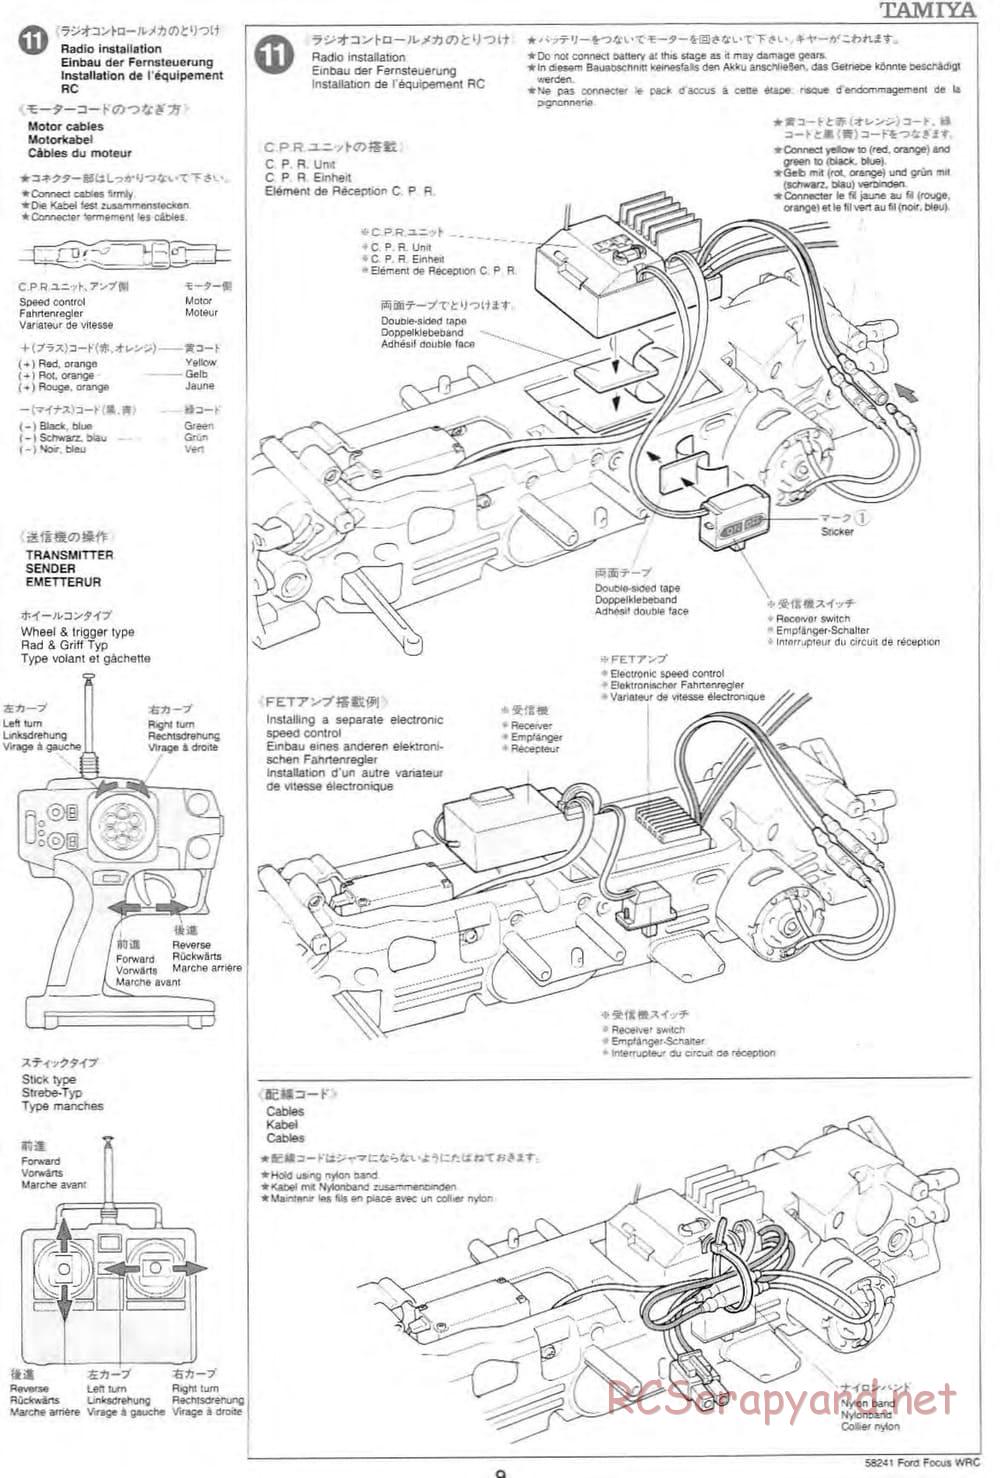 Tamiya - Ford Focus WRC - TL-01 Chassis - Manual - Page 9